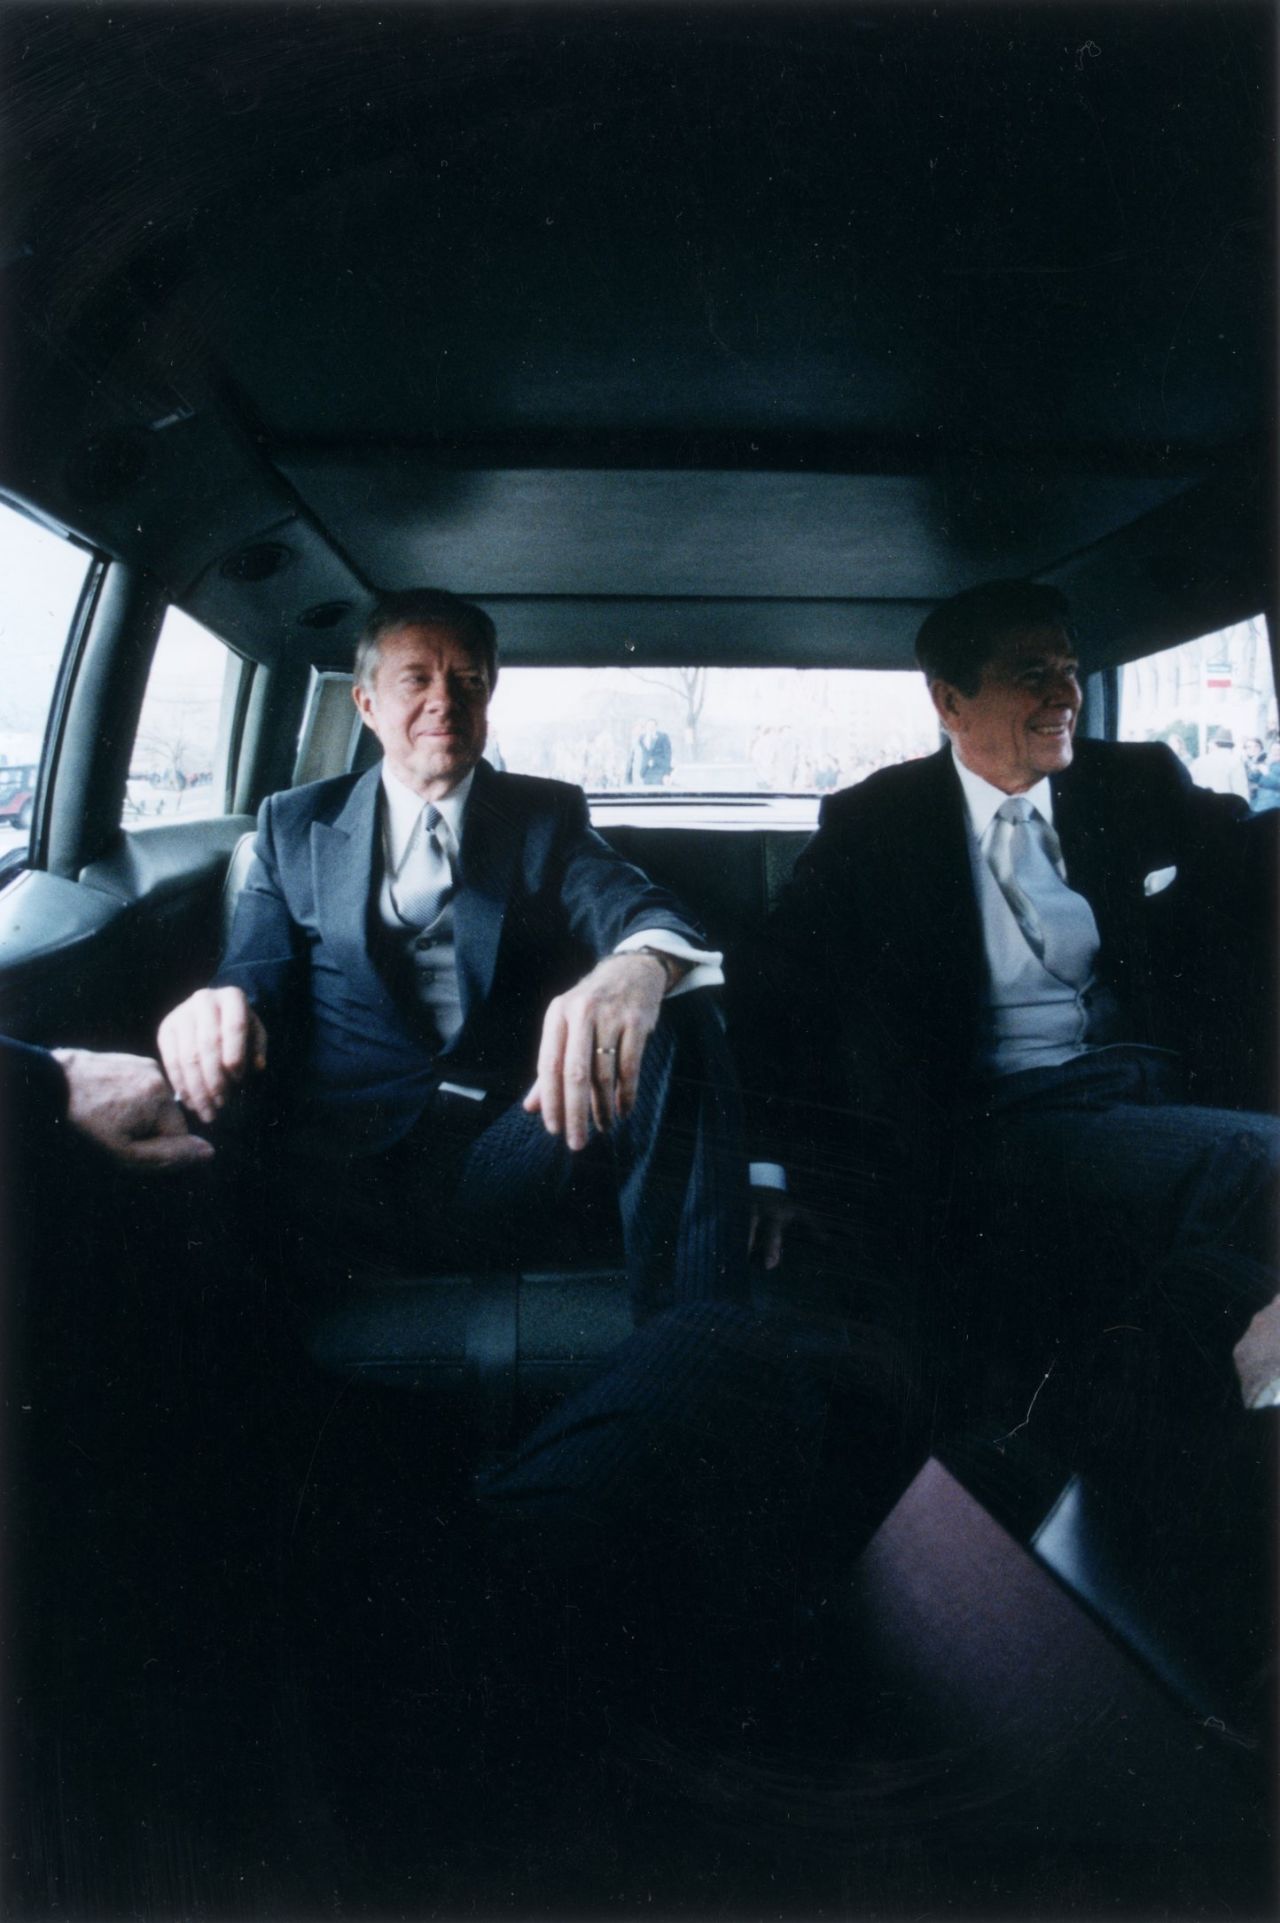 Outgoing President Jimmy Carter, left, sits with president-elect Reagan in the back of a limousine en route to Reagan's inauguration on January 20, 1981.